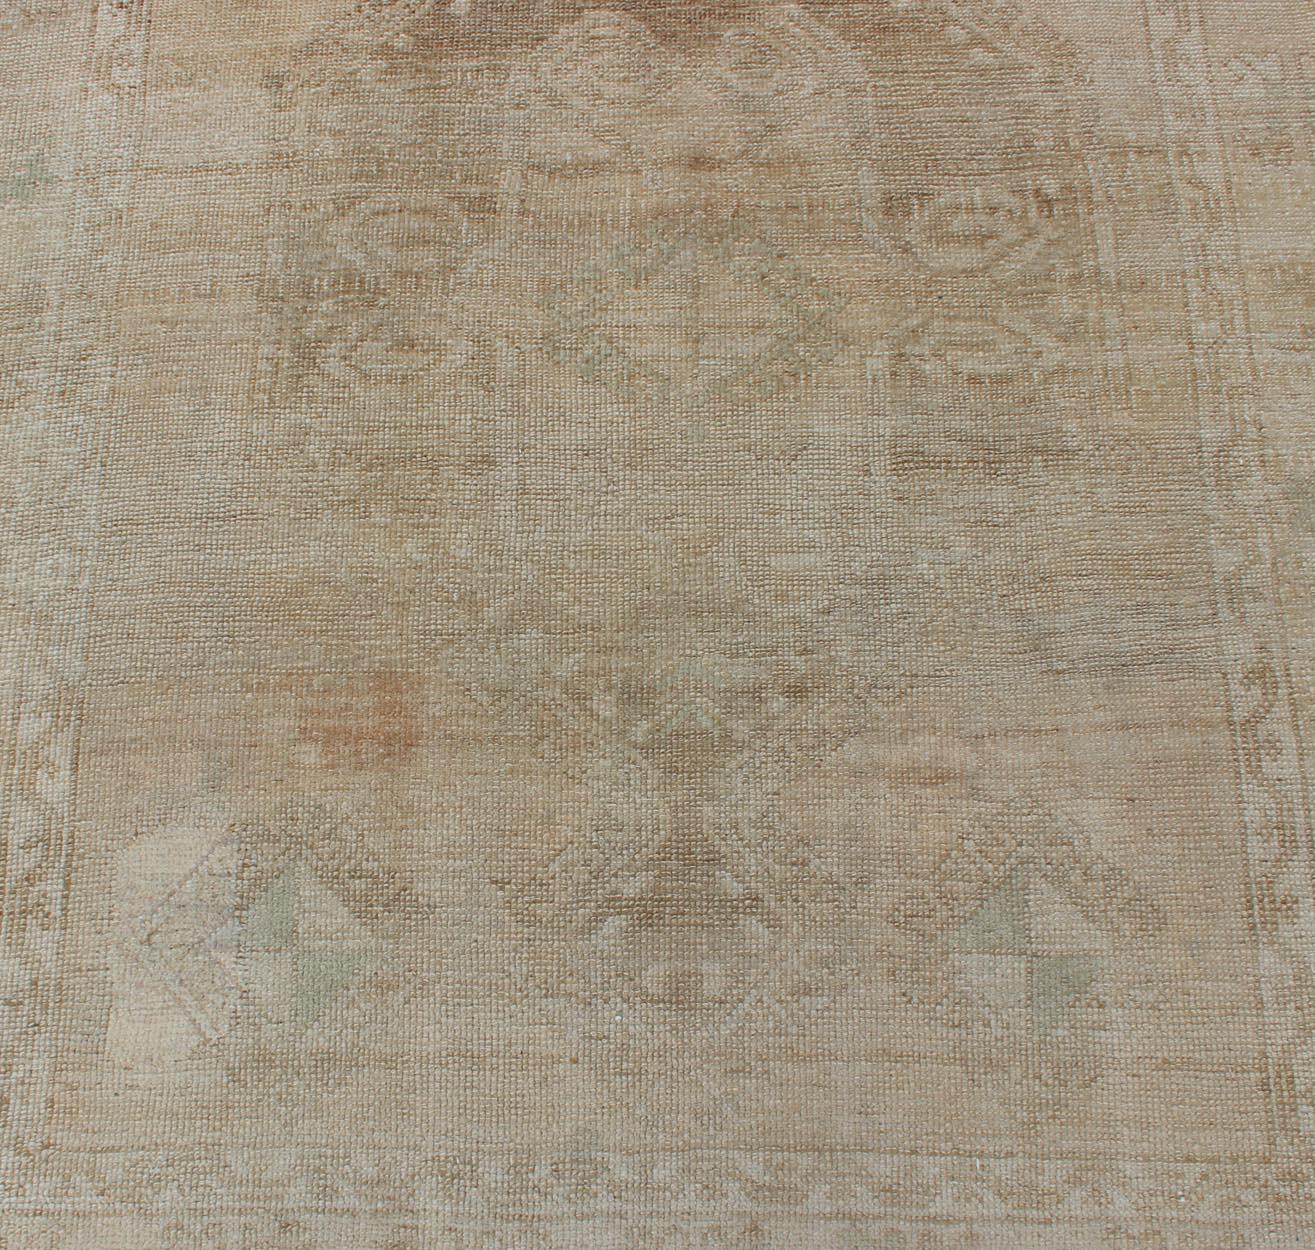 Wool Hand Knotted Vintage Turkish Runner in Earth Tones & Light Brown in Medallions For Sale